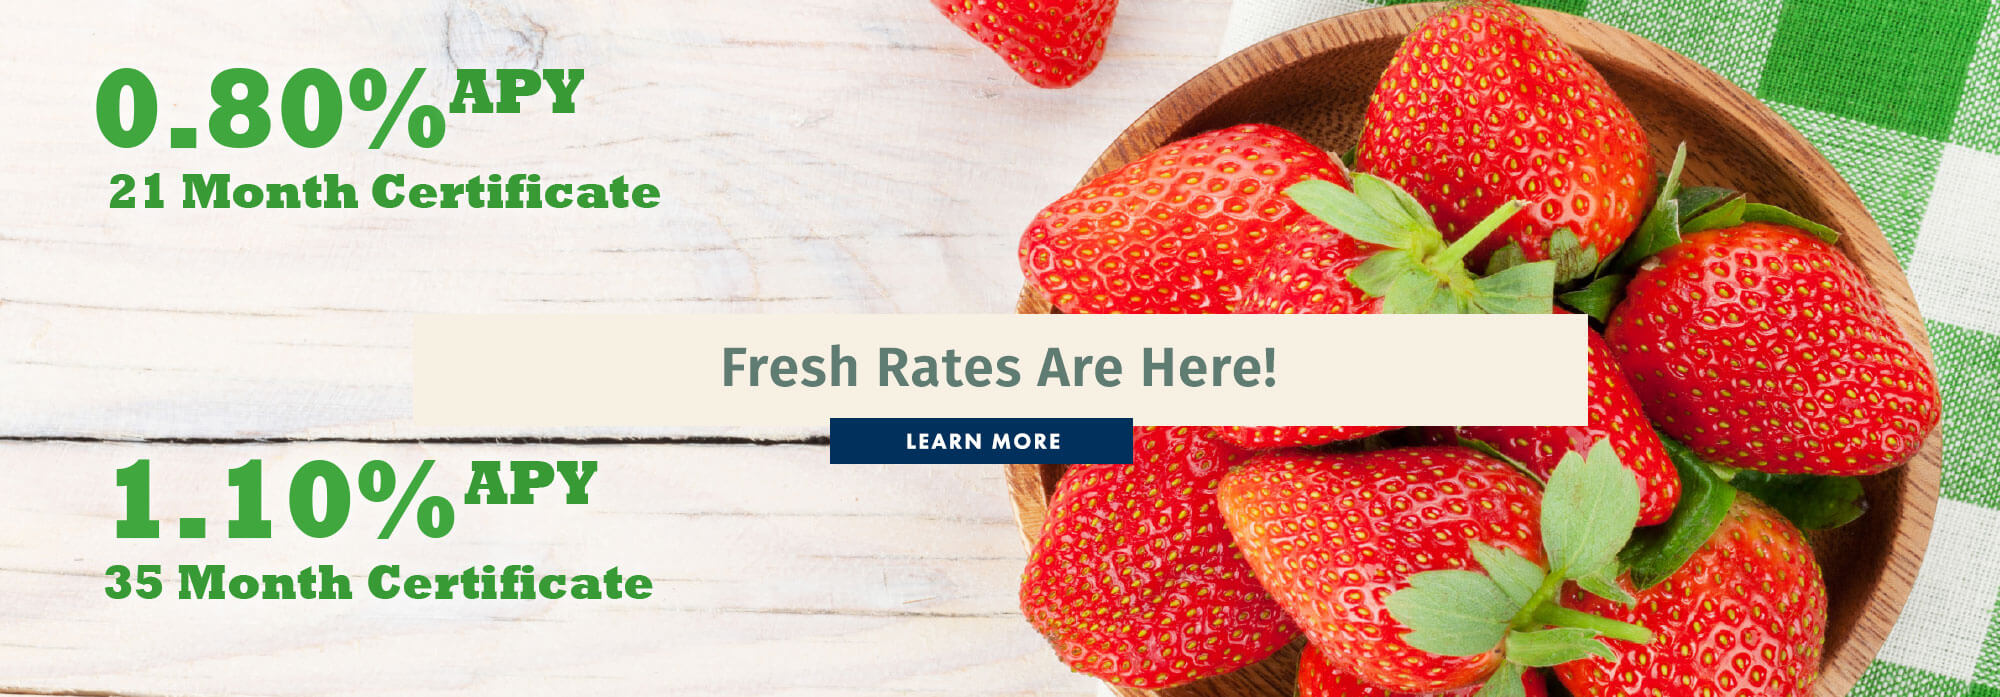 Fresh Rates Are Here!